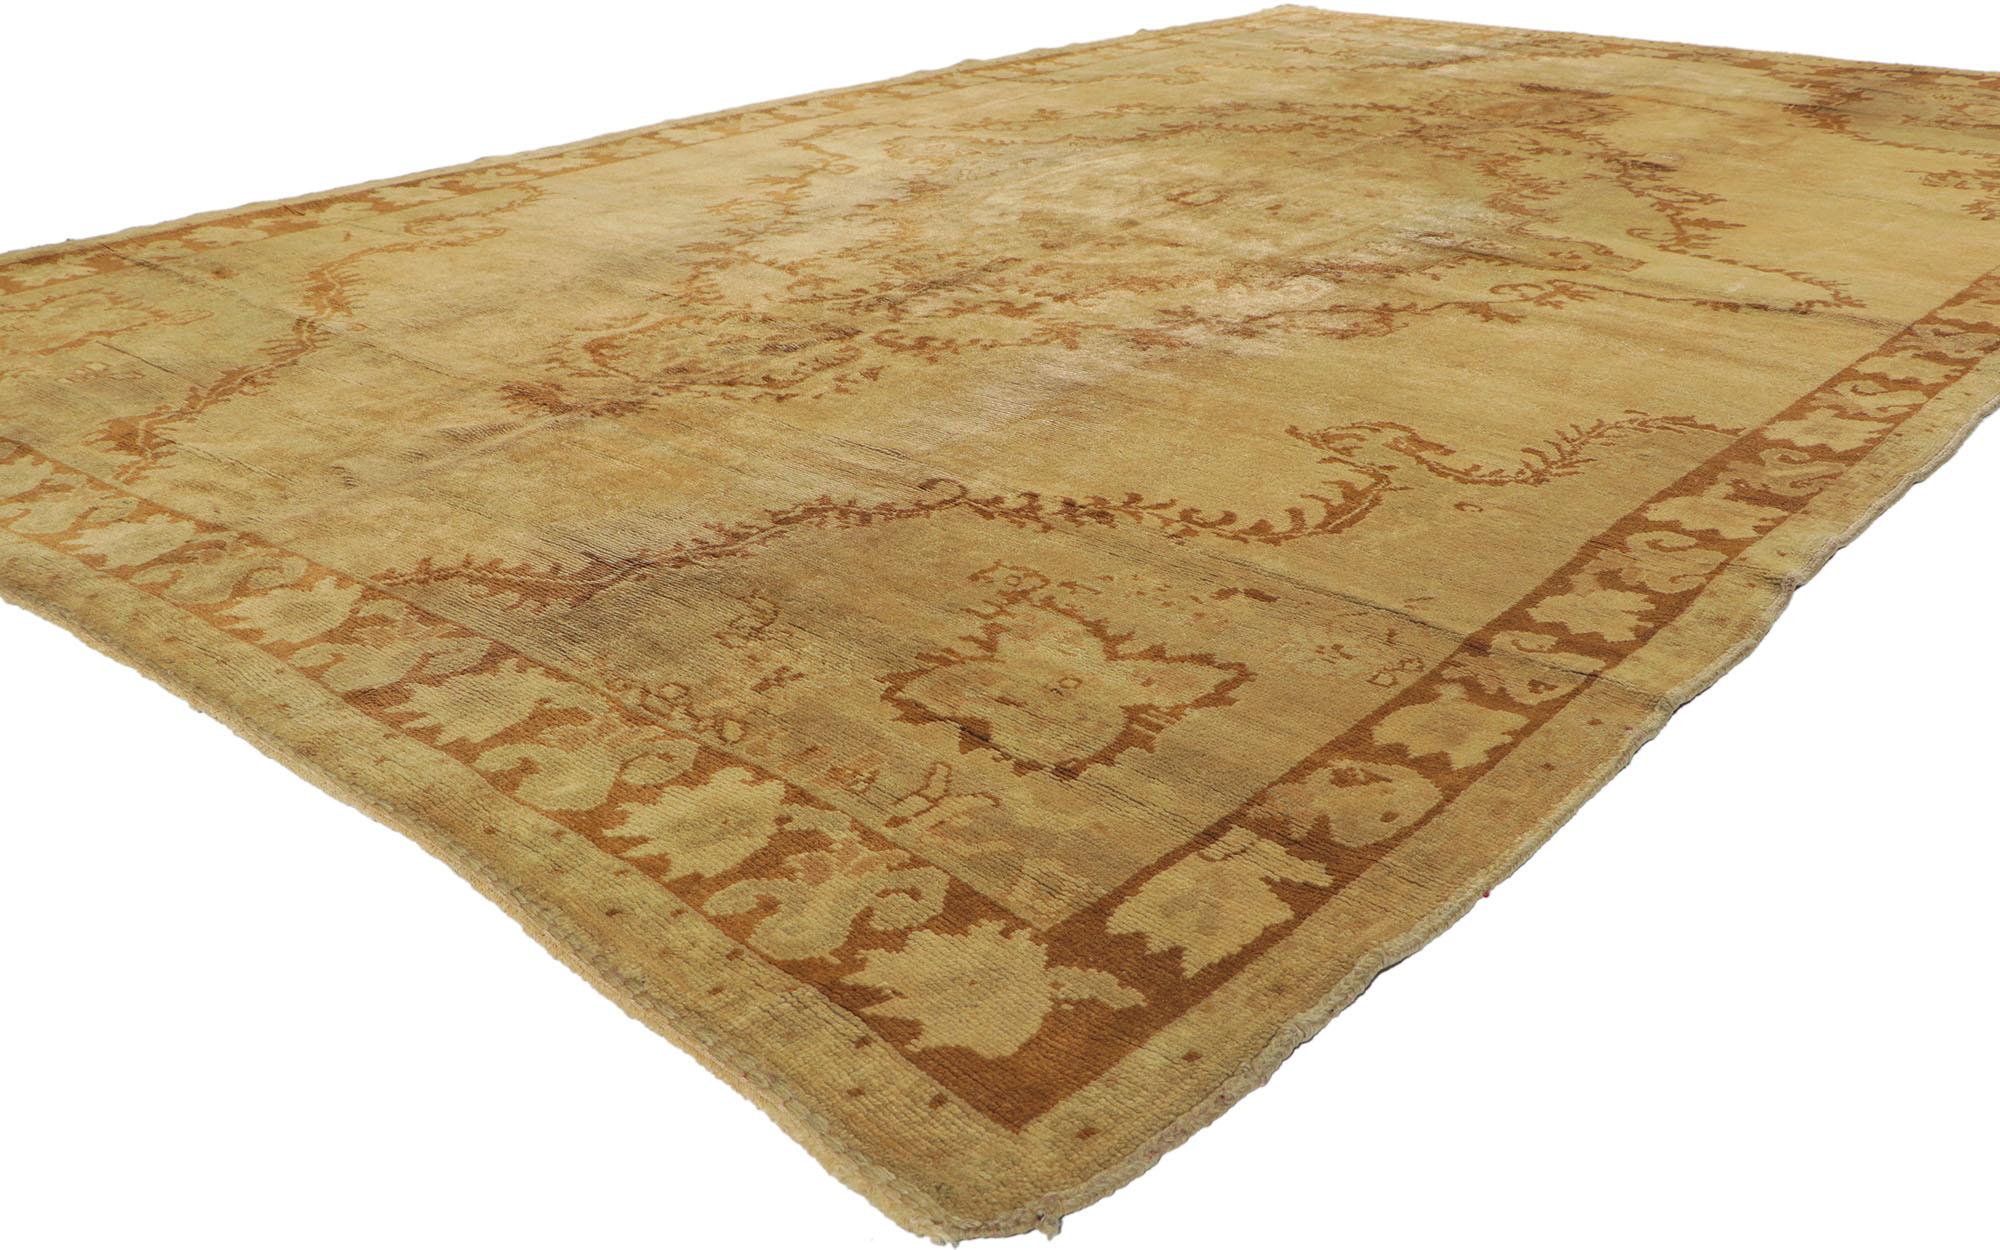 50448, vintage Turkish Oushak rug with warm Russian Dachas Luxe Home style. This hand knotted wool vintage Turkish Oushak rug features a center medallion with finials outlined in acanthus leaves garland wreath. The medallion floats in an open